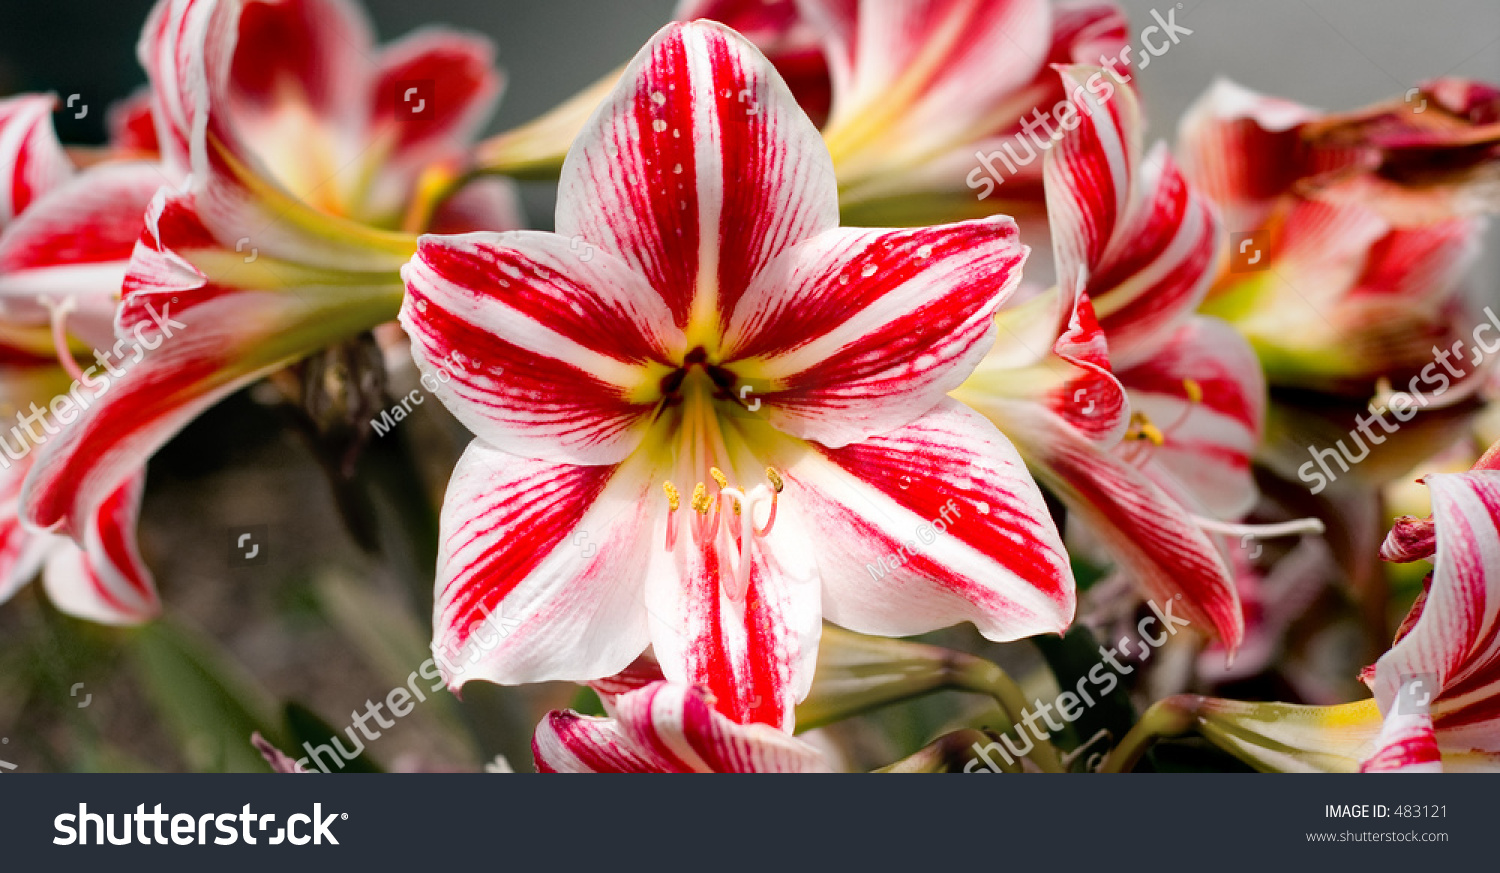 White Red Lilies Stock Photo 483121 - Shutterstock